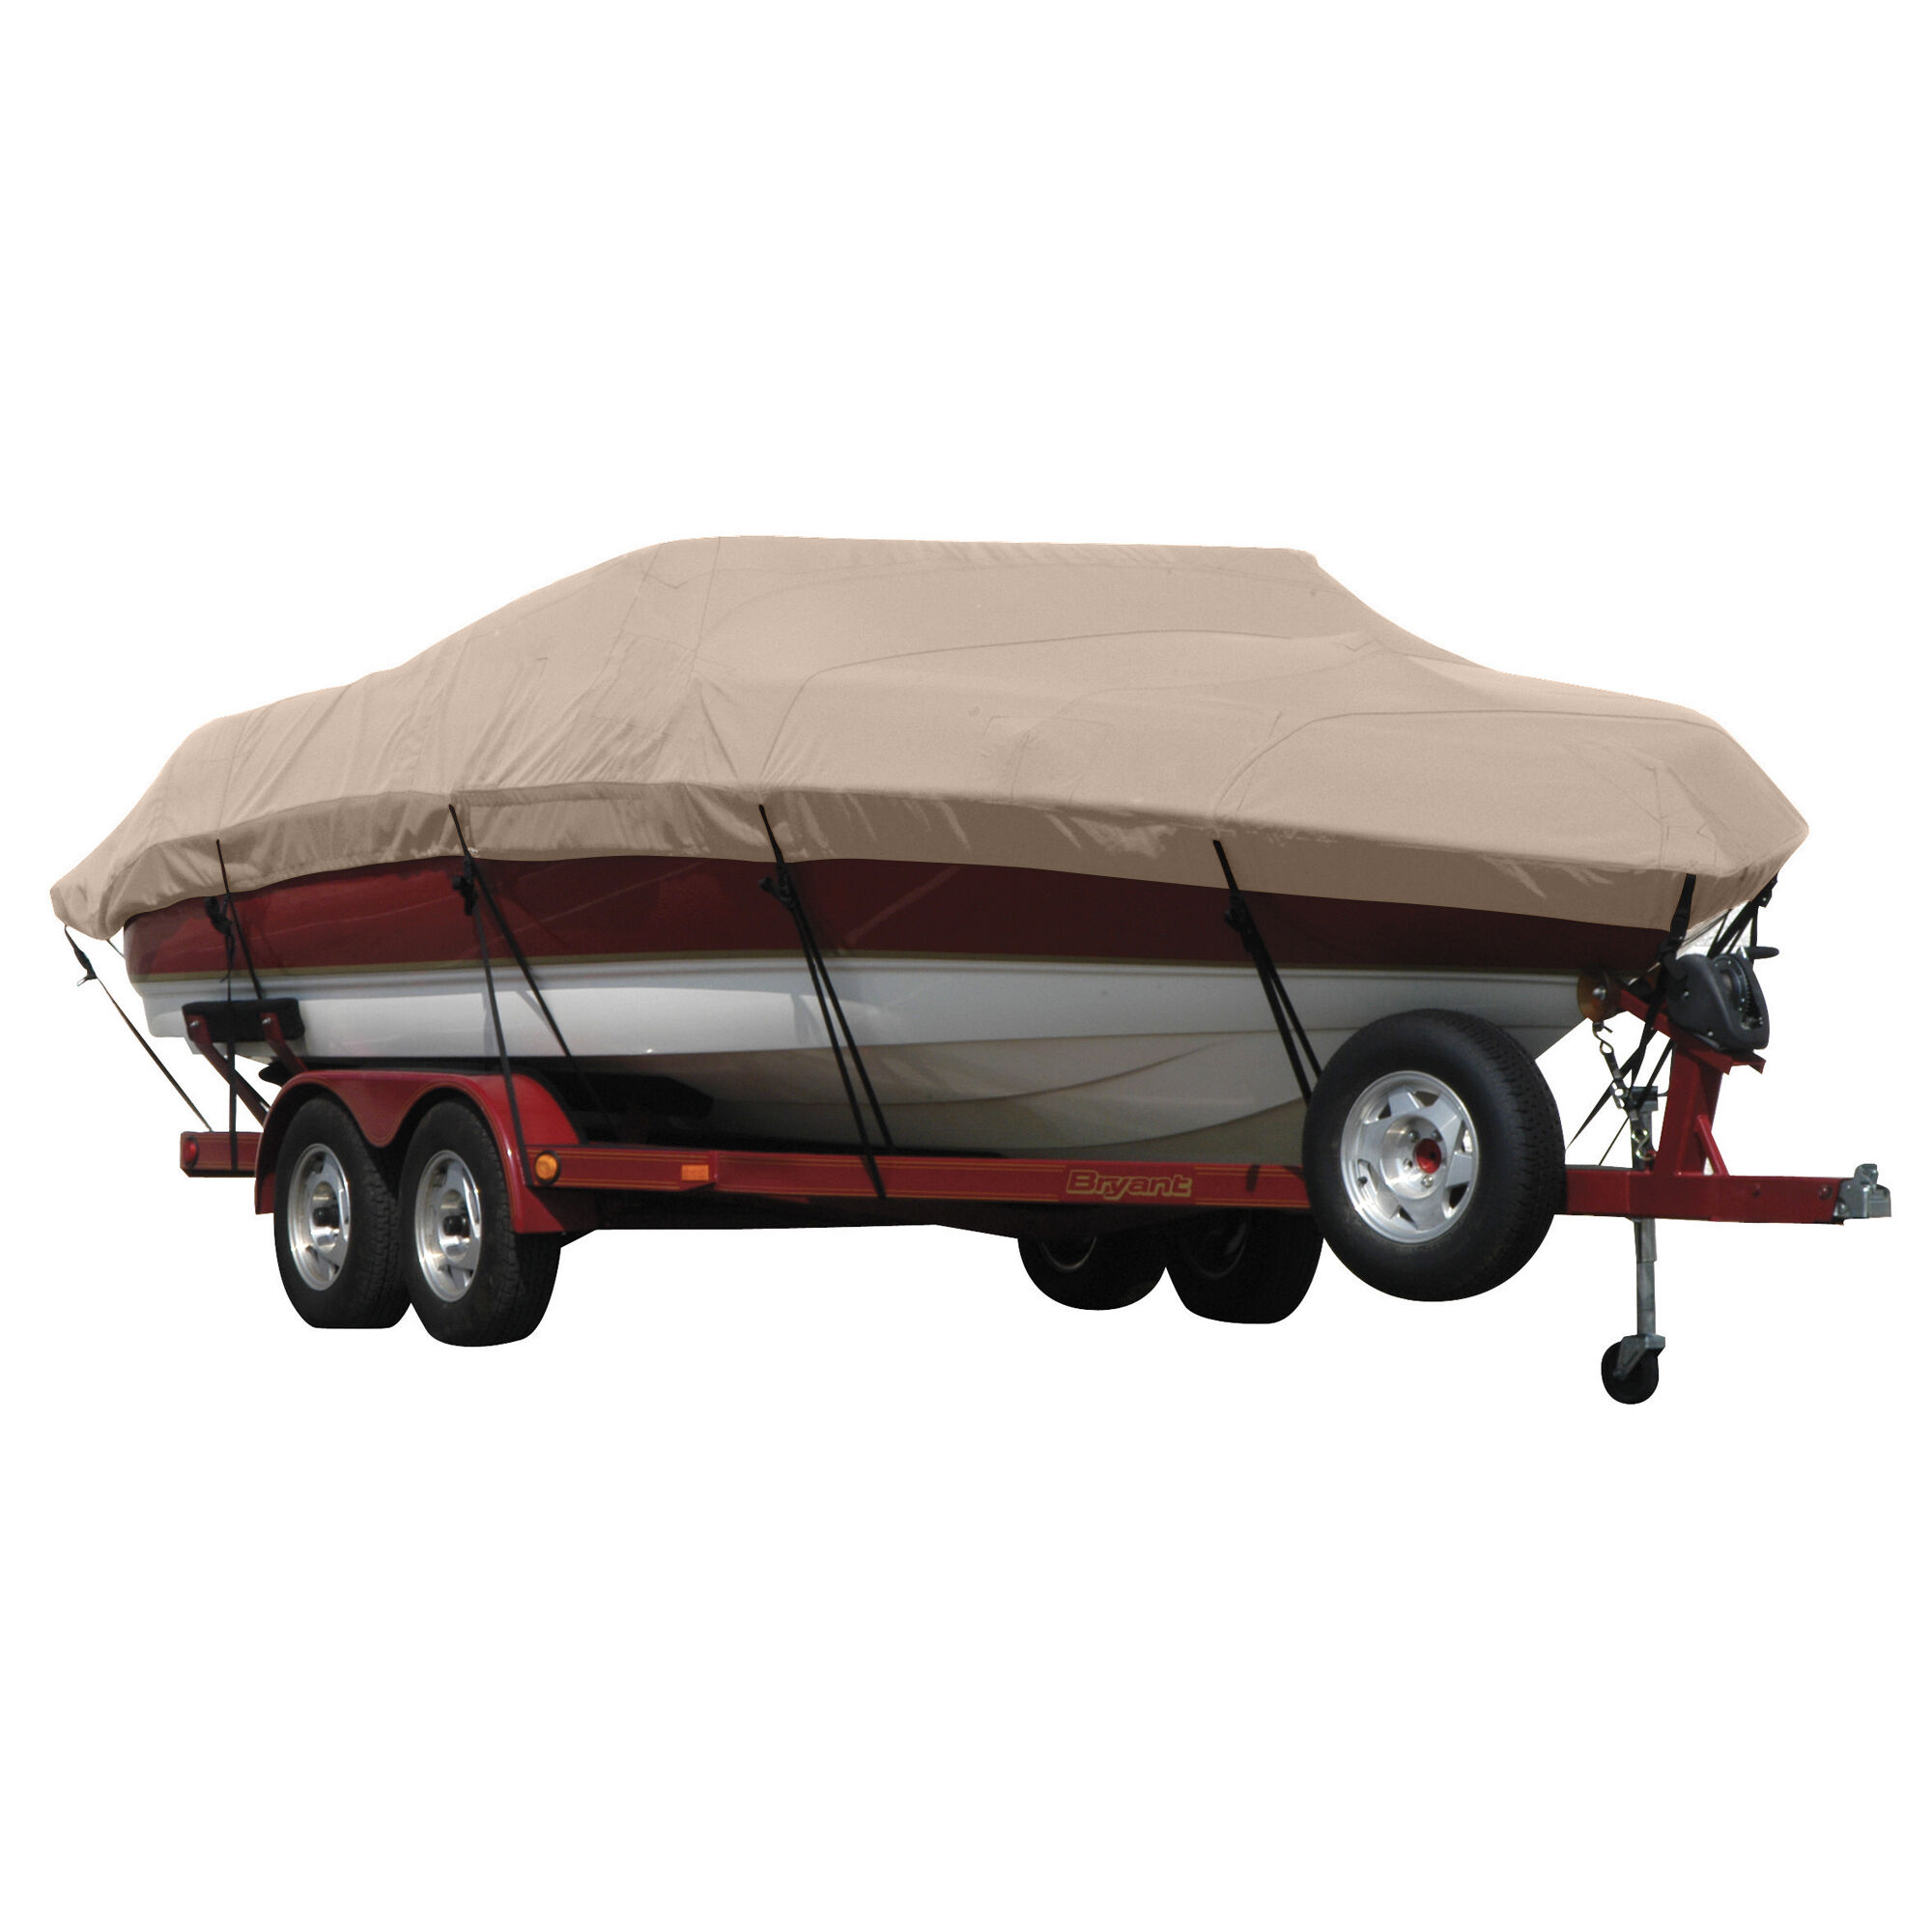 Covermate Exact Fit Sunbrella Boat Cover for Campion Chase 800 Chase 800 I/O. Linnen in Linen